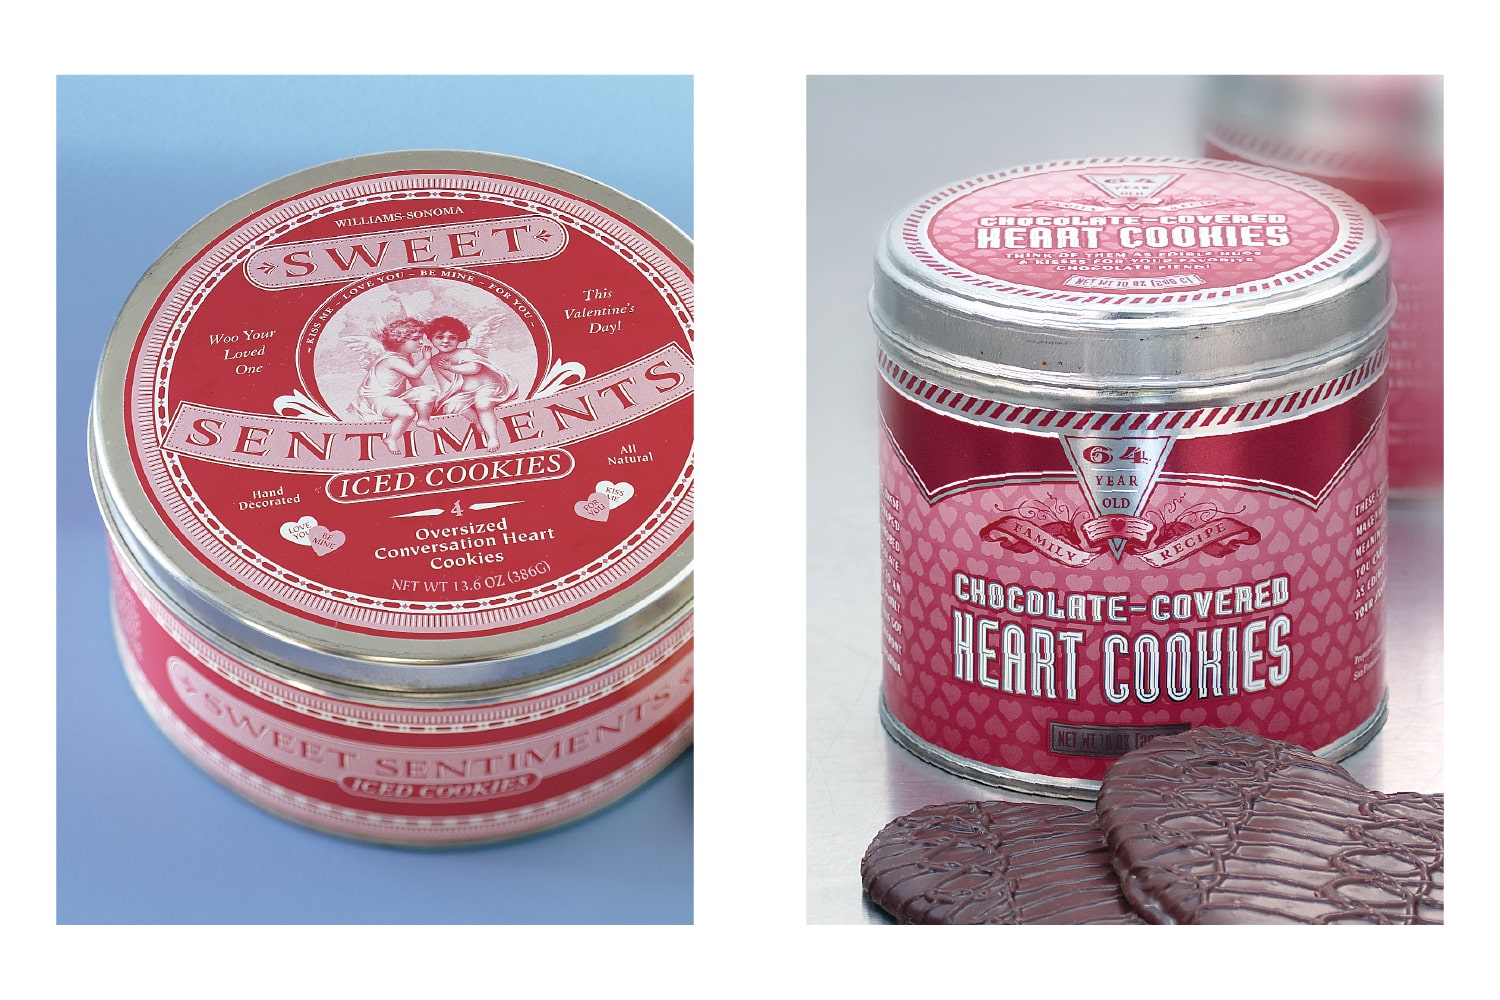 Williams Sonoma Valentines Cookie packaging. Design and photo creative direction by Juli Shore Design